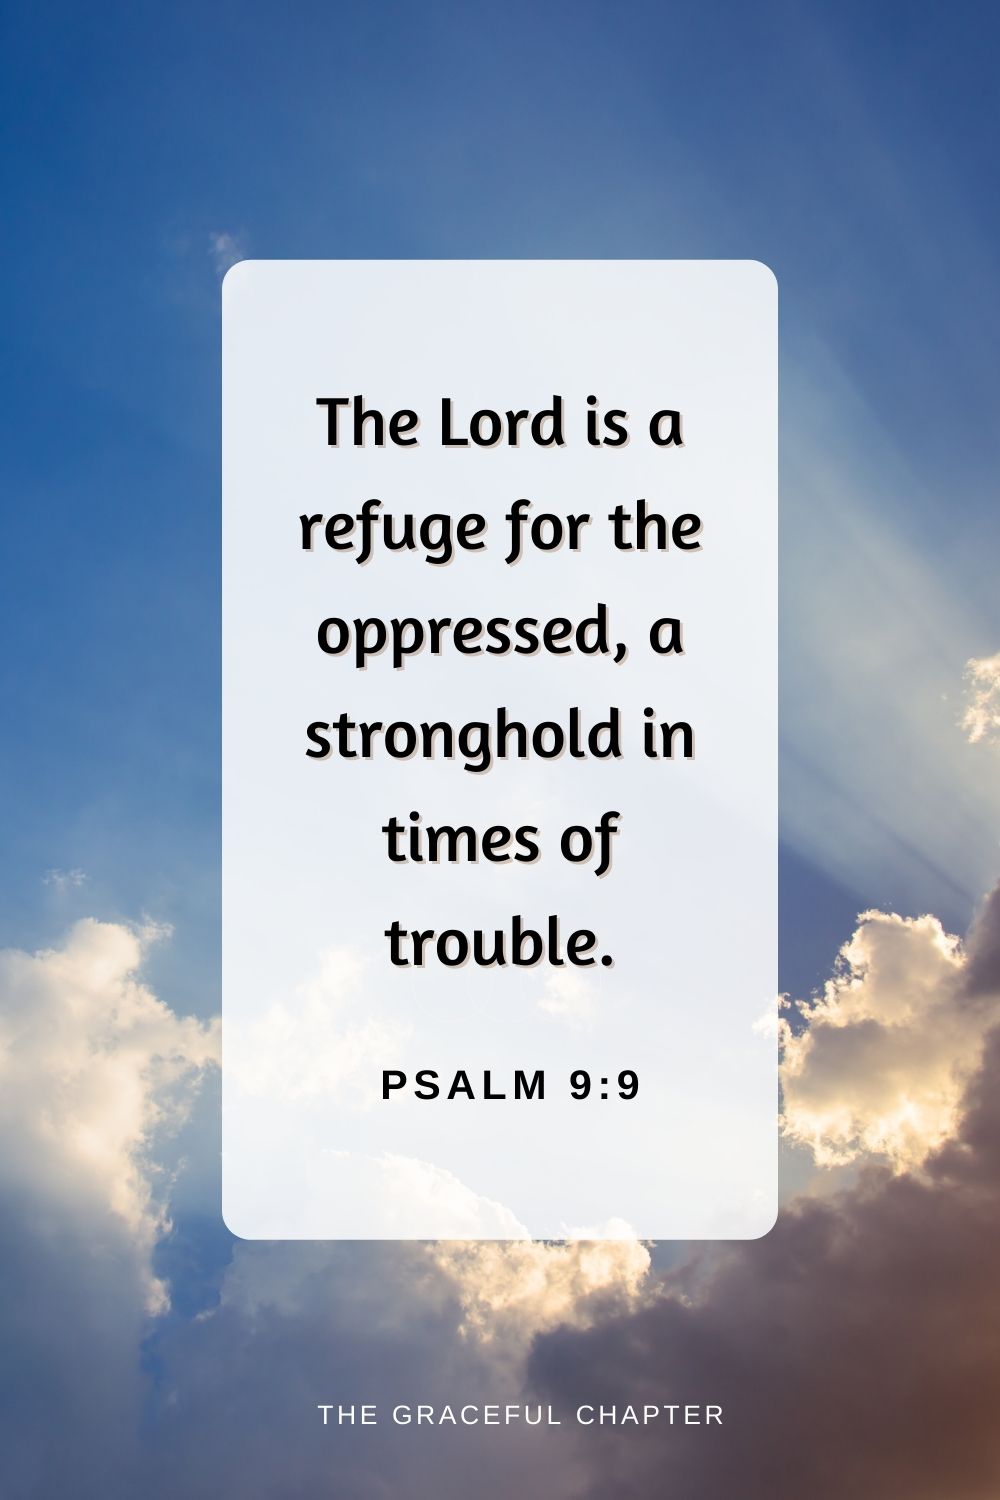 The Lord is a refuge for the oppressed, a stronghold in times of trouble.